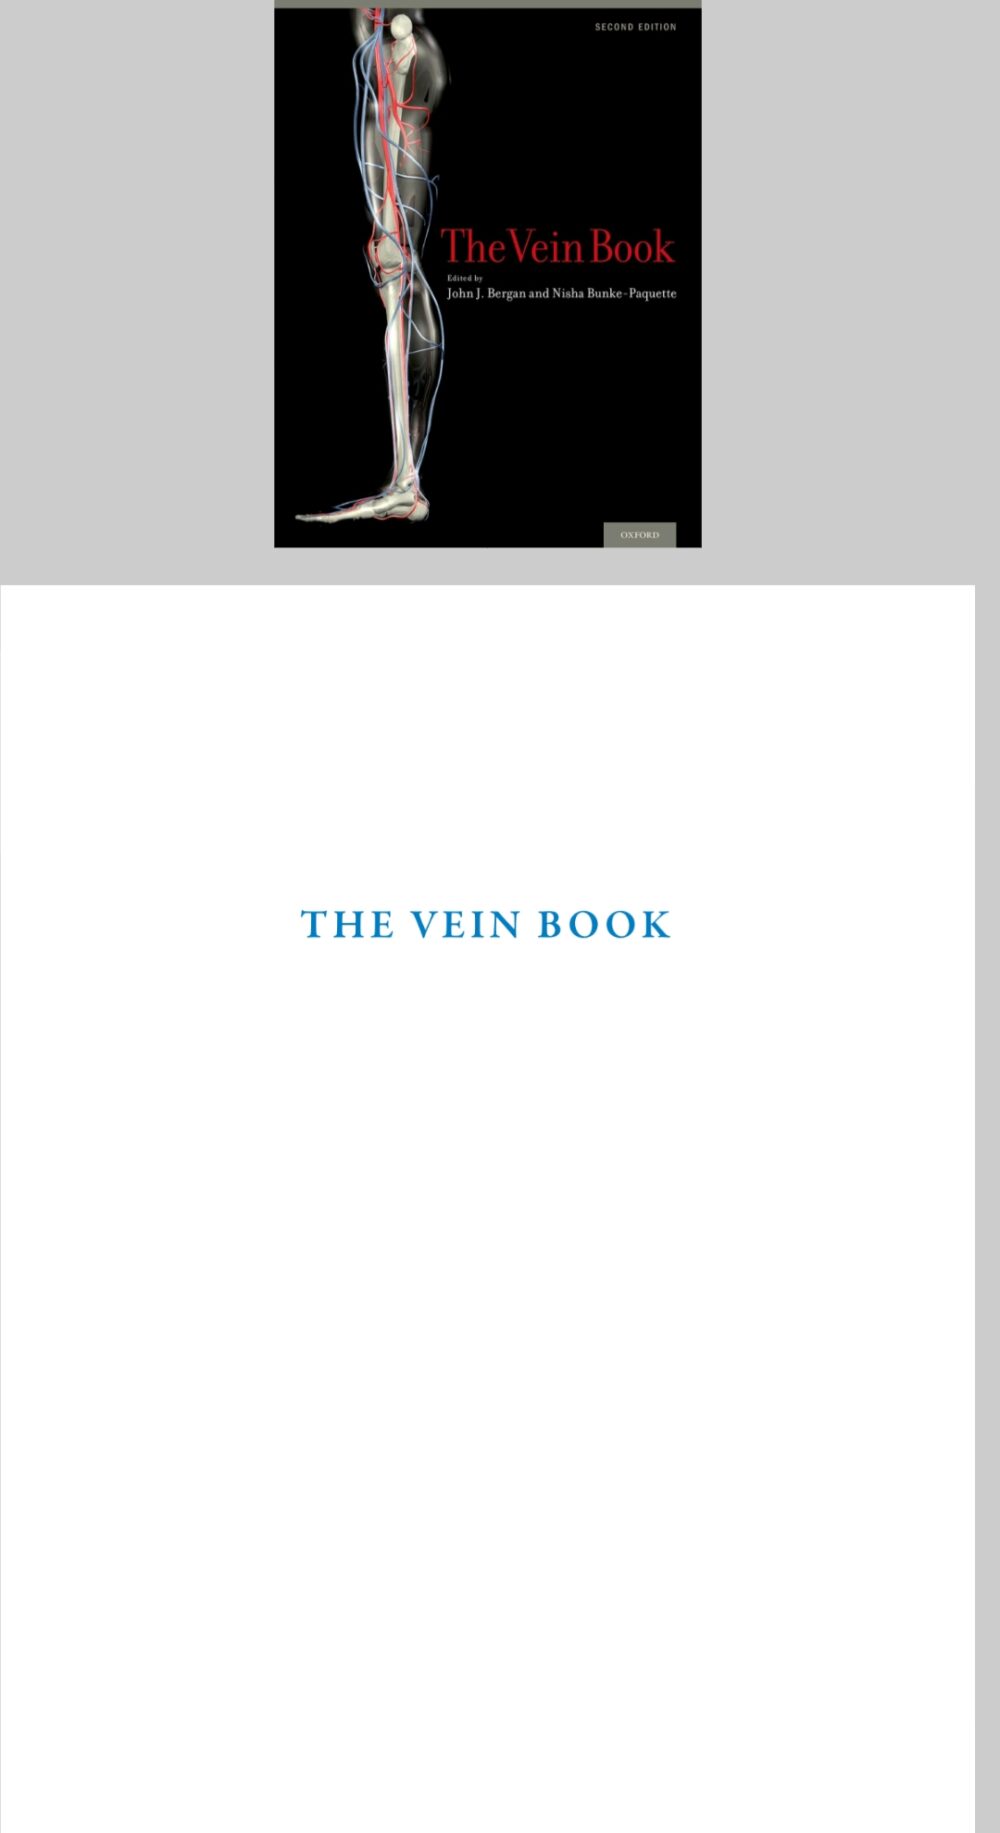 The Vein Book 2nd ed, Second Edition